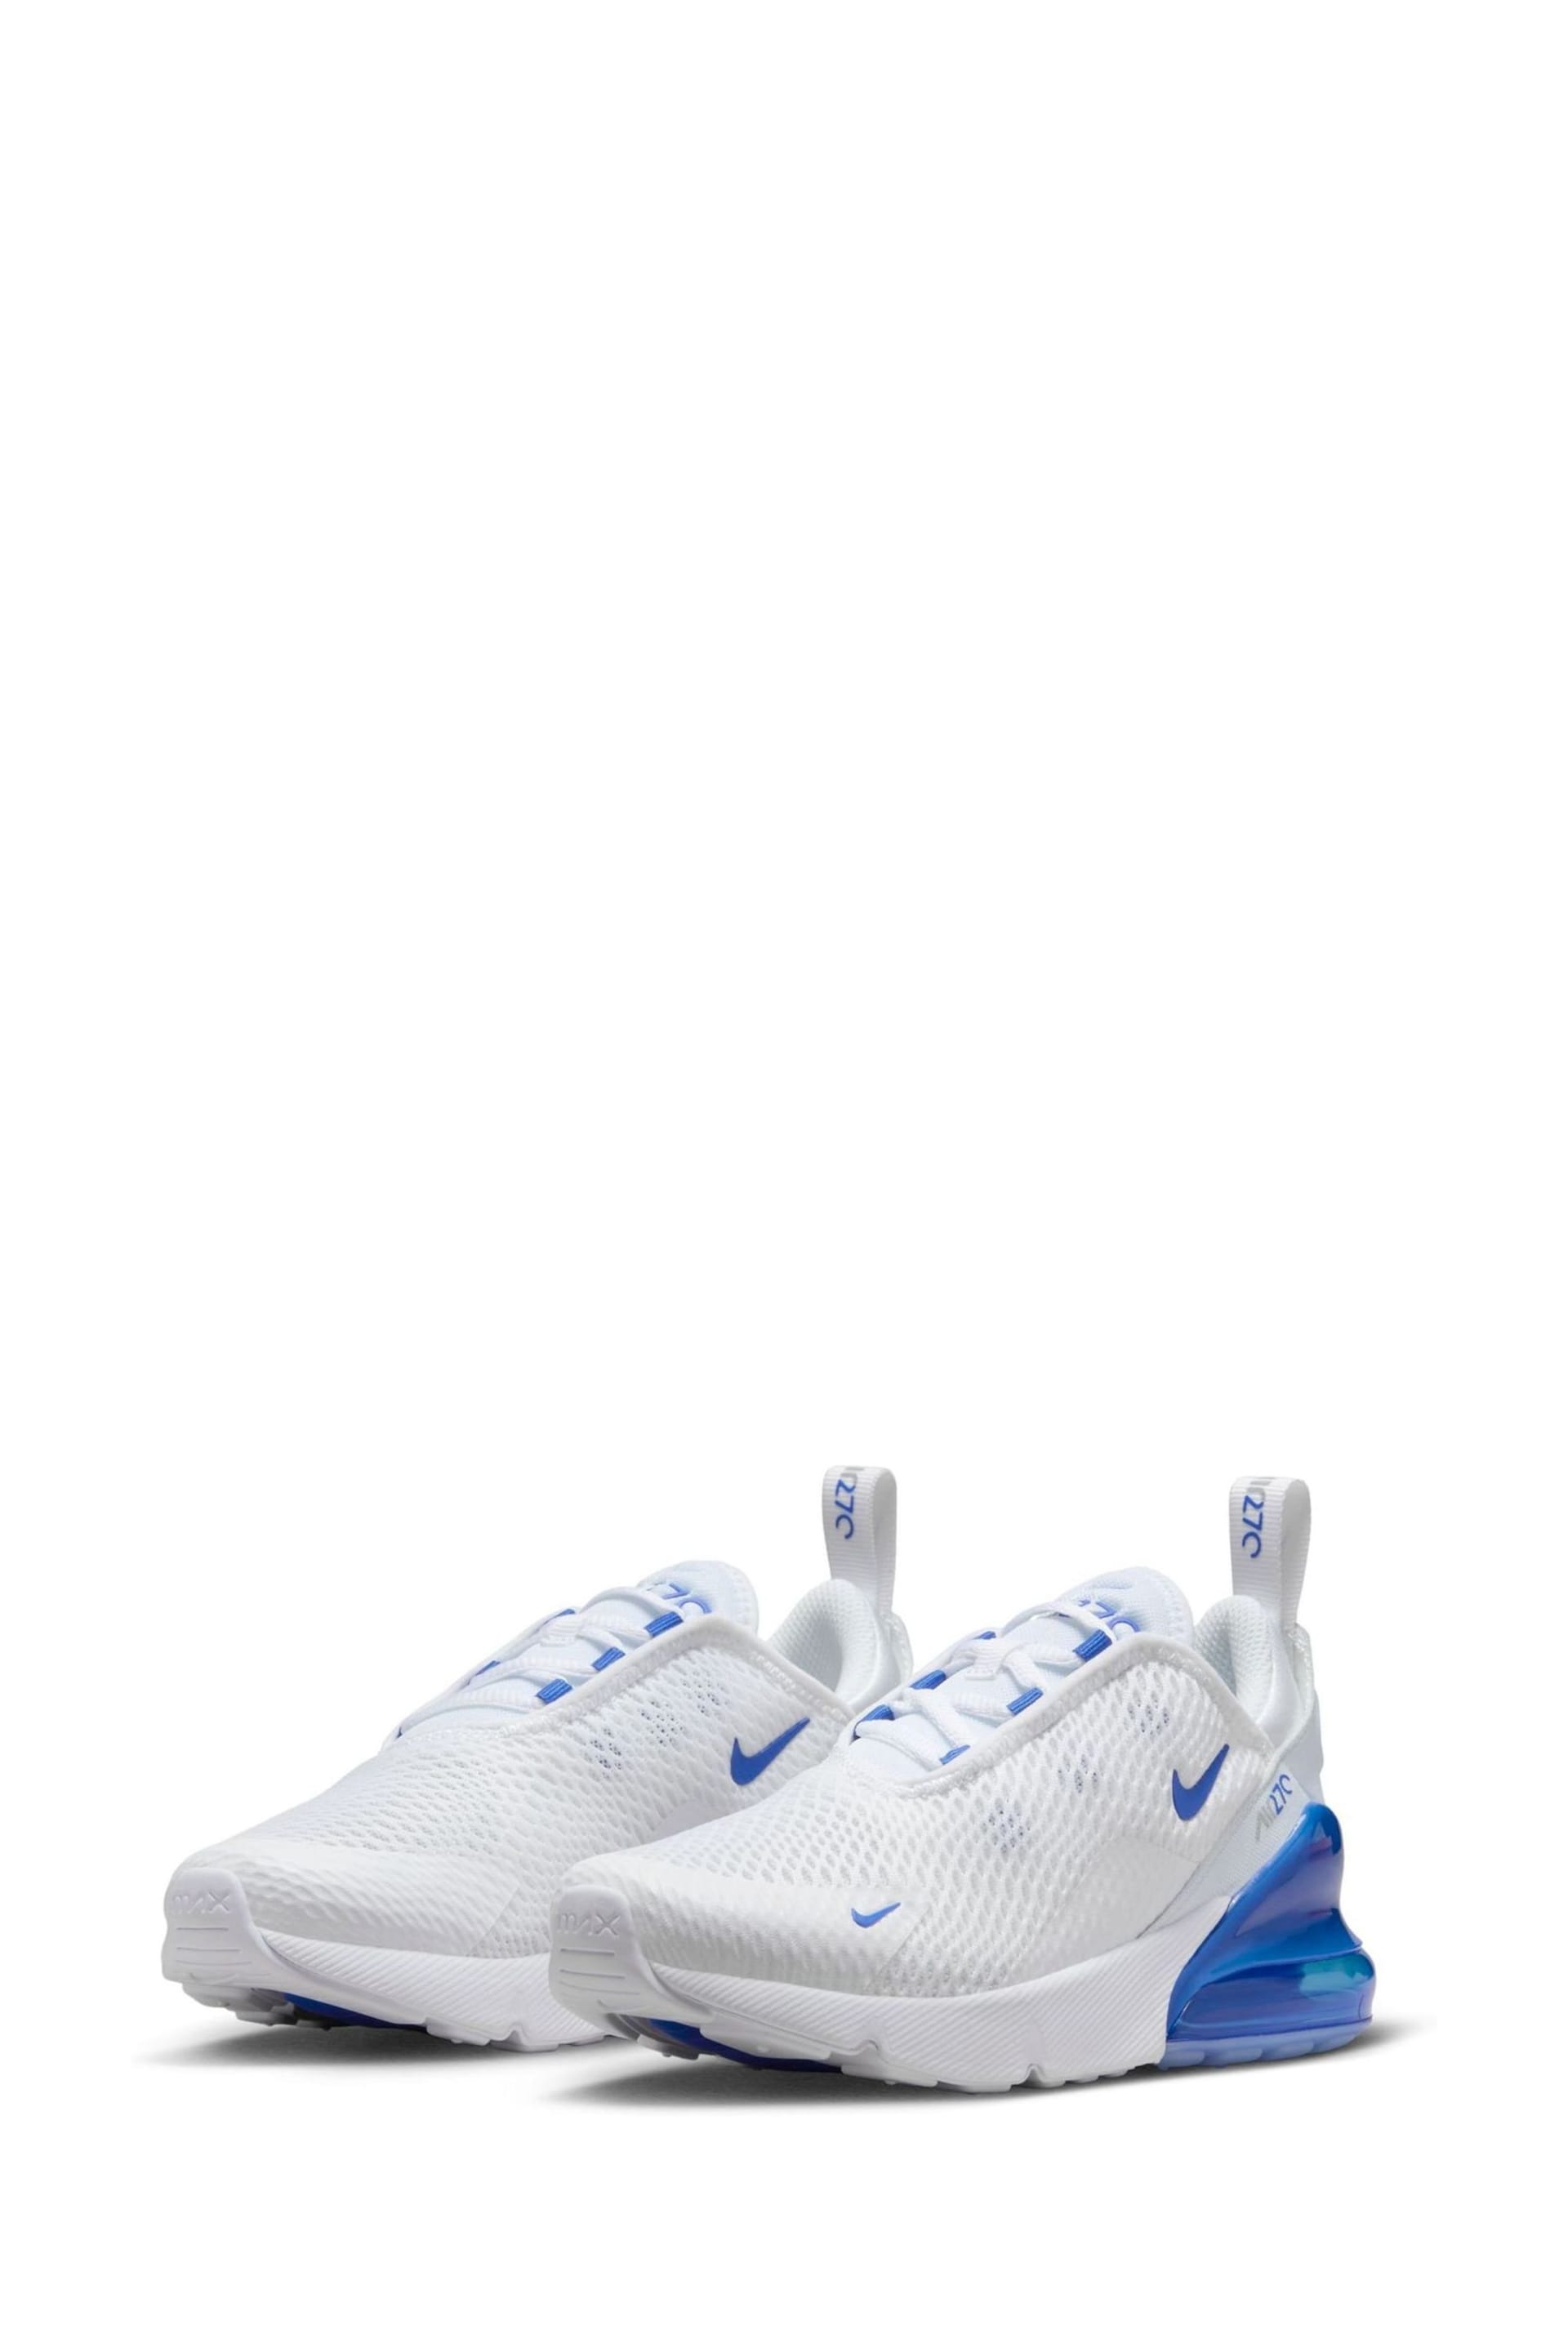 Nike White/Royal Blue Air Max 270 Junior Trainers - Image 2 of 10